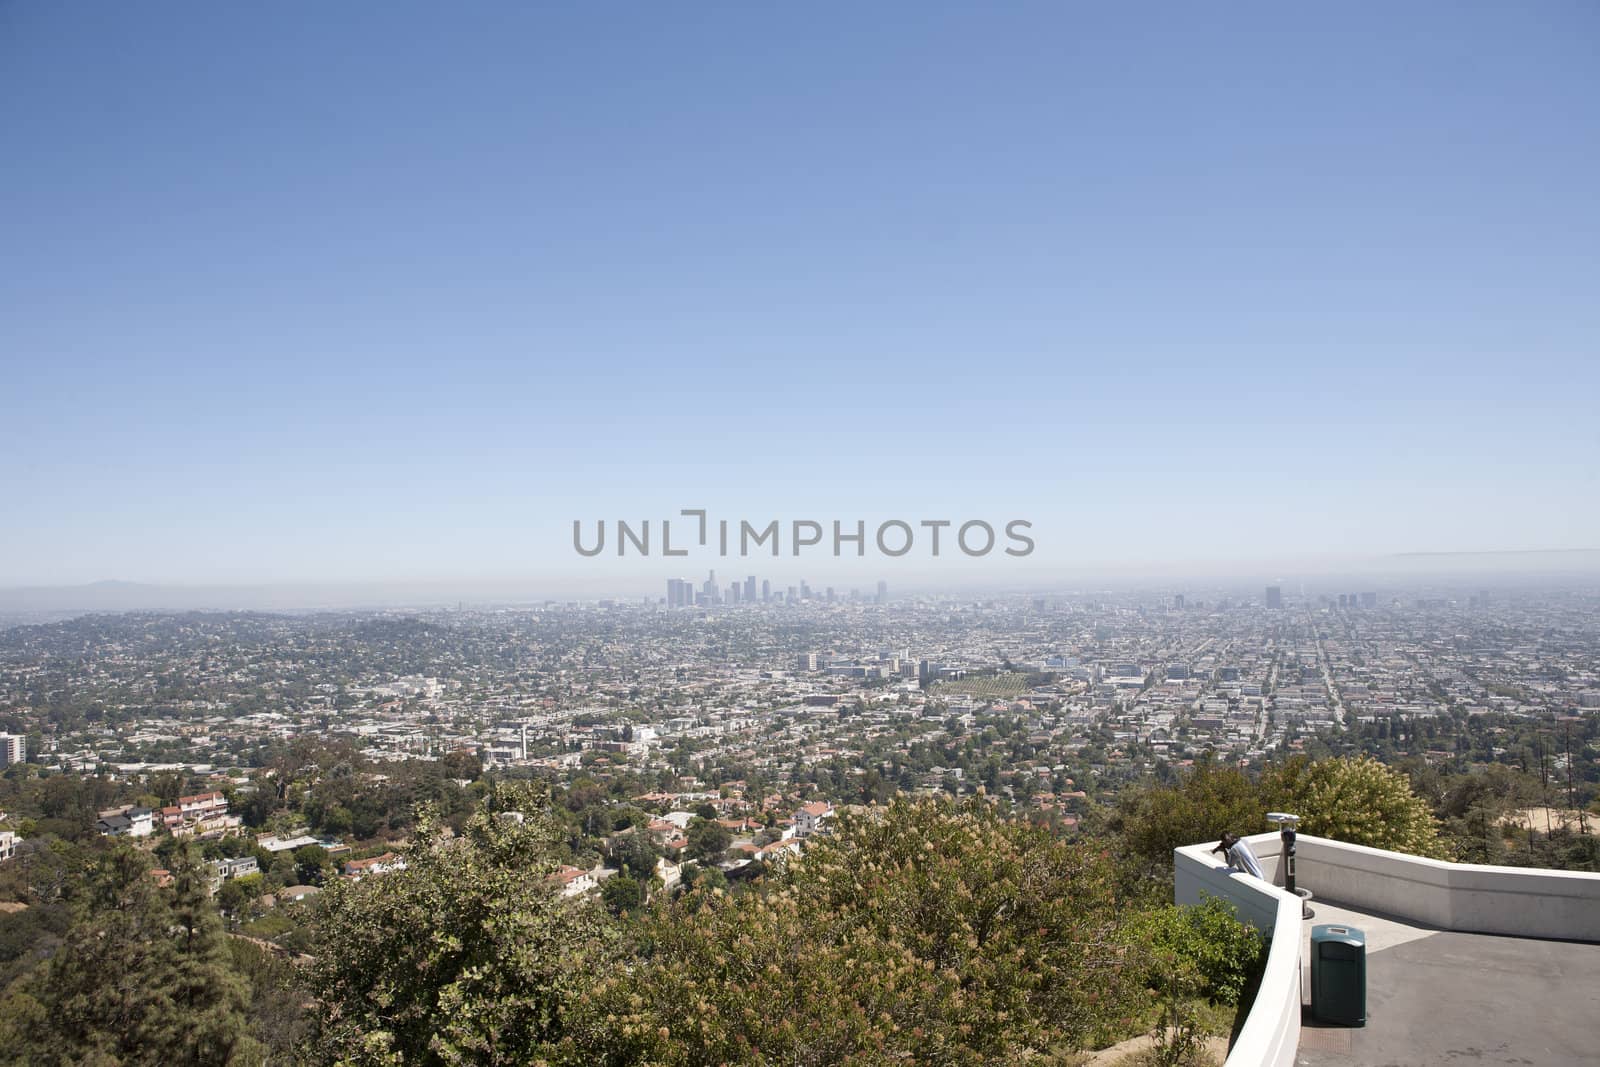 View of Los Angeles, CA from Griffith Observatory.